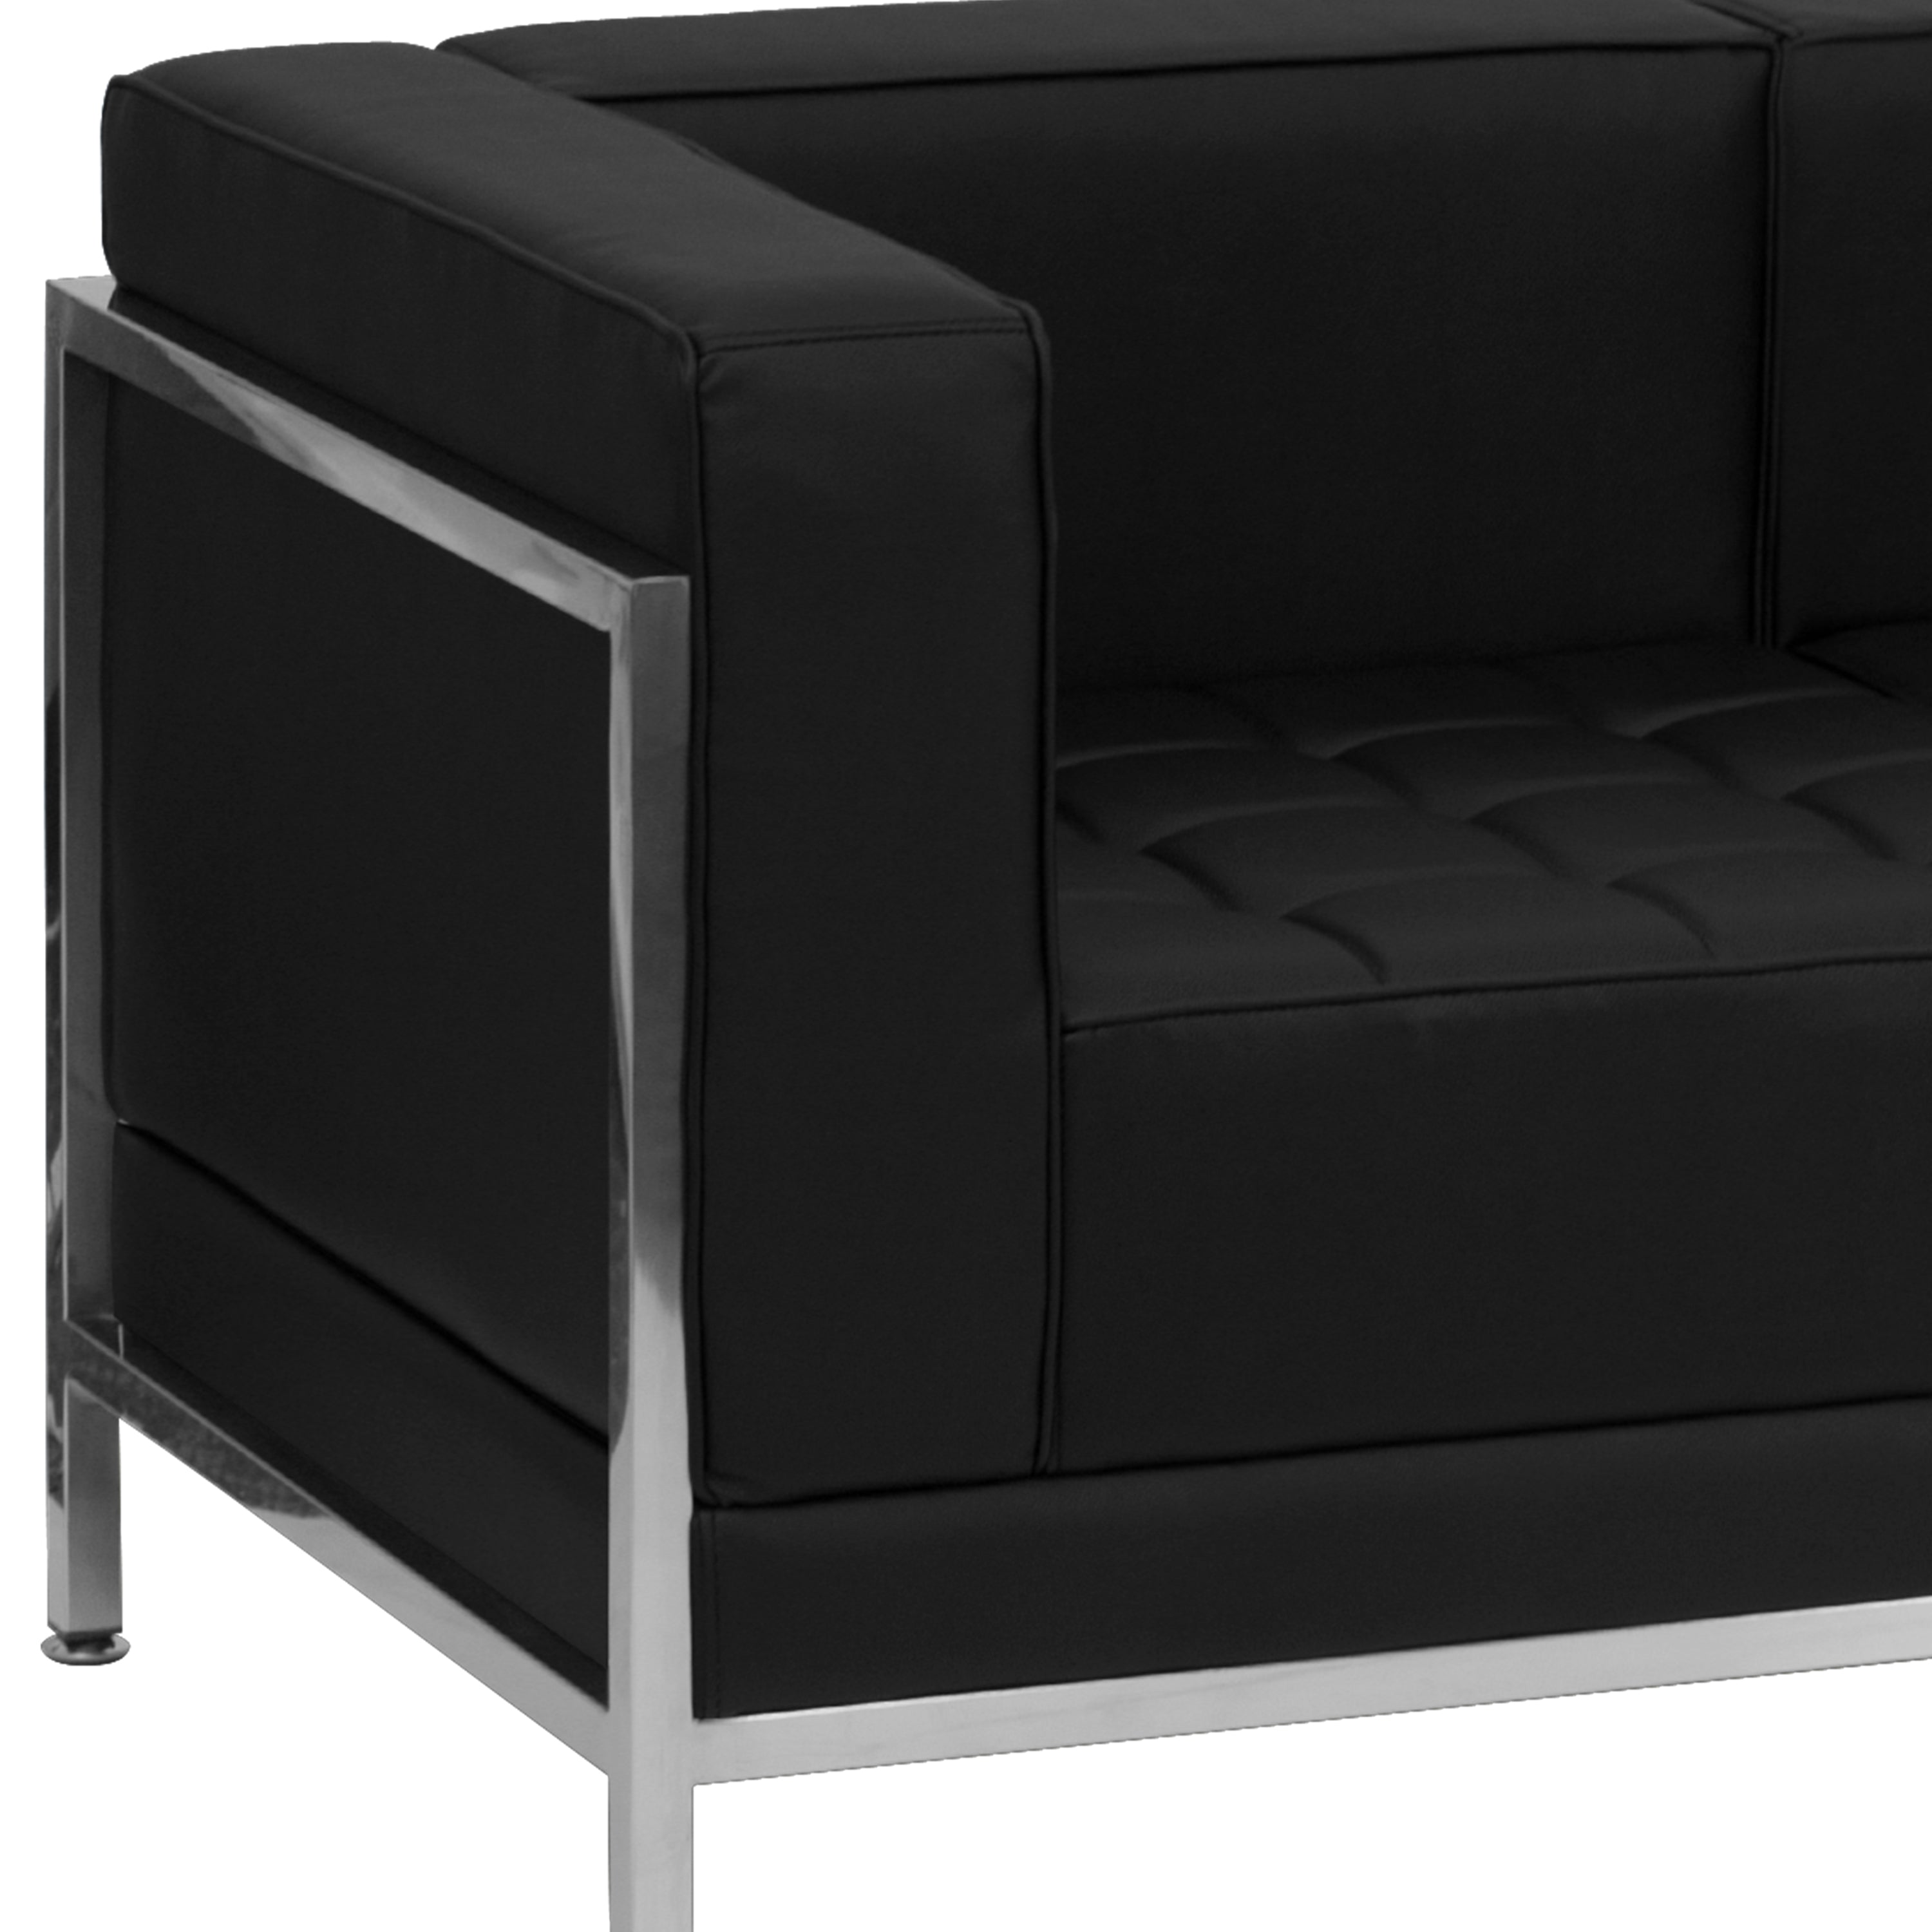 HERCULES Imagination Series Contemporary LeatherSoft Modular Sofa with Quilted Tufted Seat and Encasing Frame-Modular Reception Sofa-Flash Furniture-Wall2Wall Furnishings